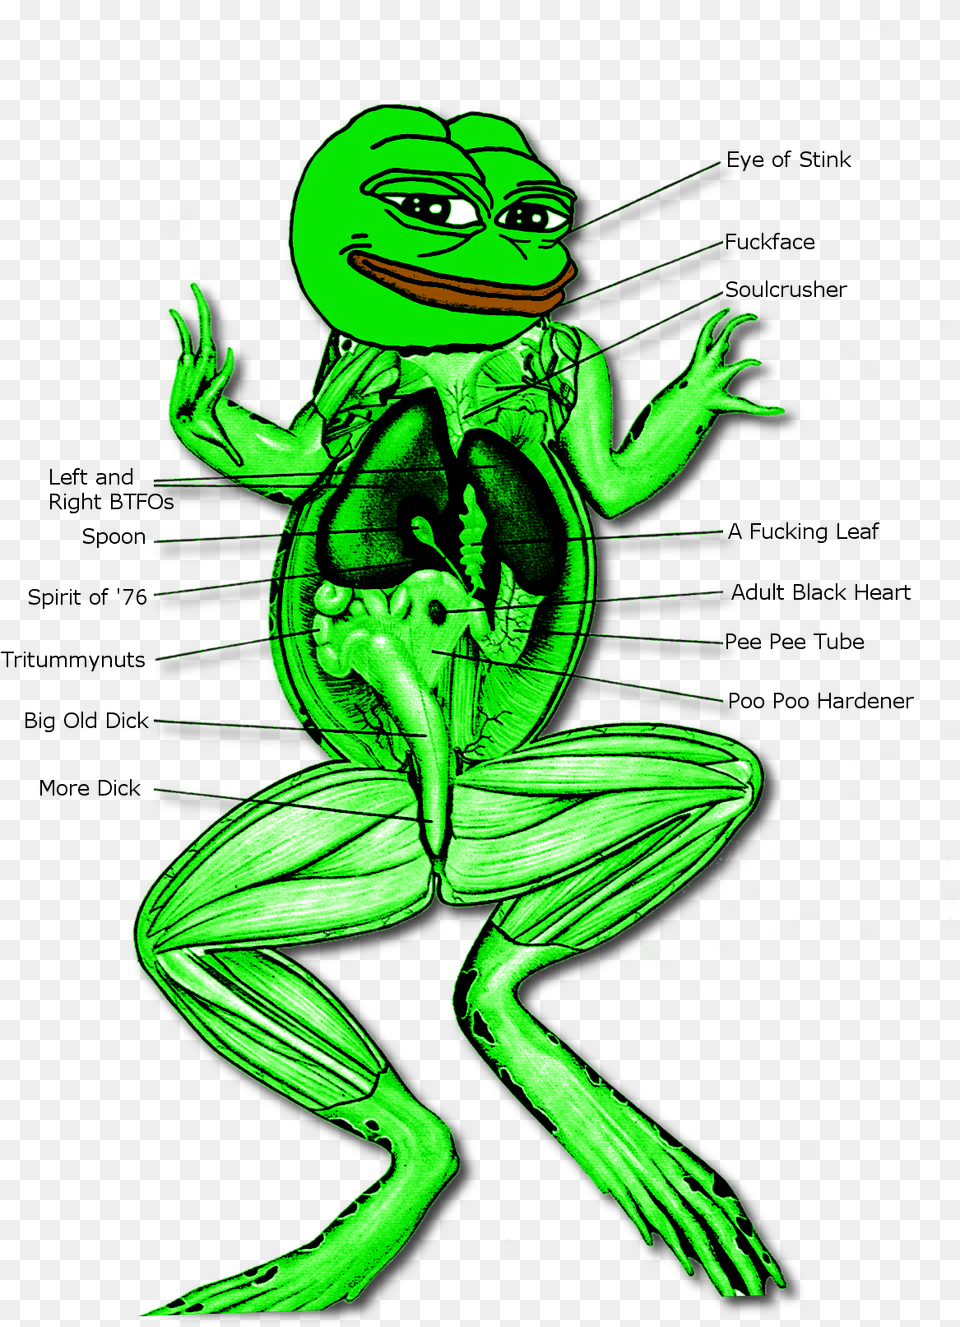 Dissection Of Digestive System Of Frog System Of A Frog, Green, Alien, Person, Face Png